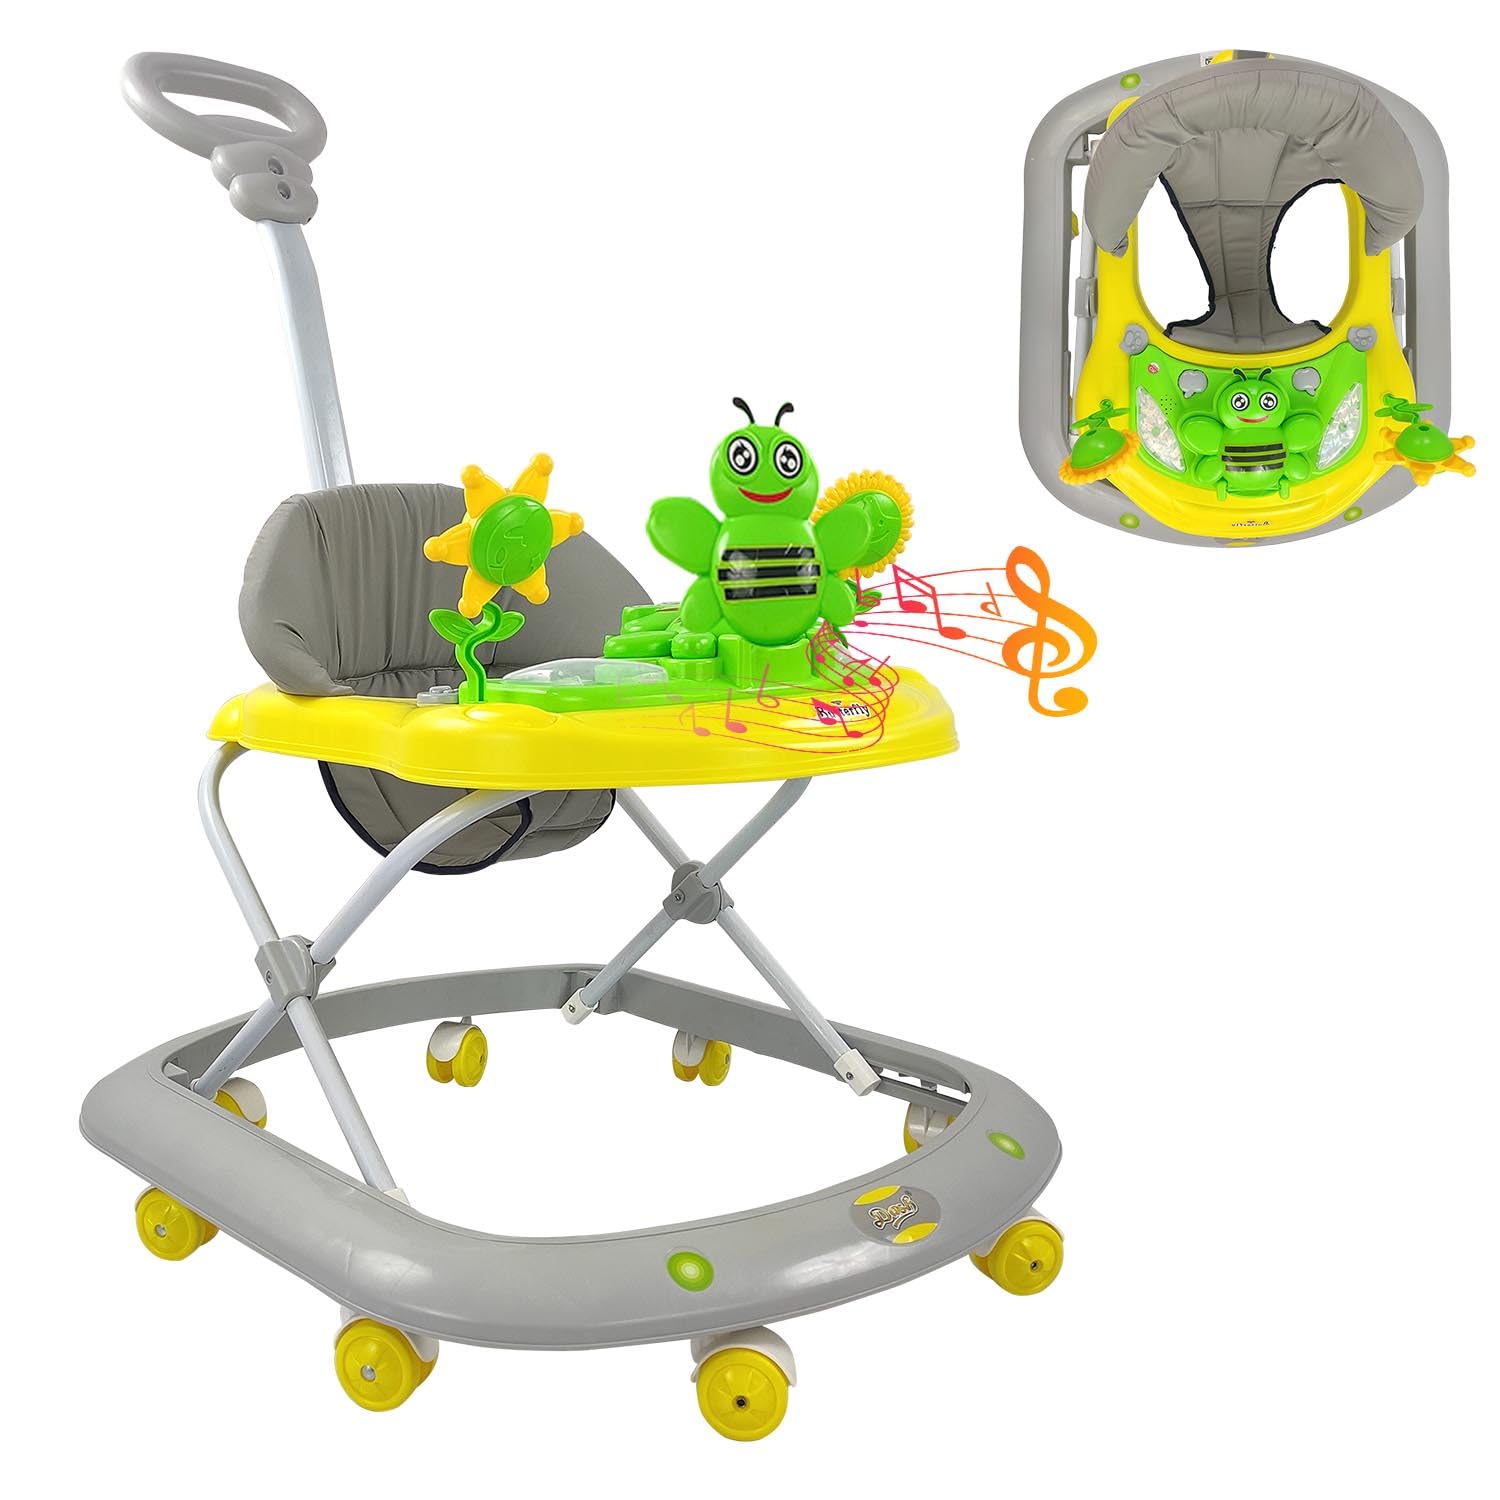 Butterfly Deluxe Baby Walker with 3 Position Adjustable Height Music & Light & Parental Handle, Foldable Activity Walker, Baby 6-18 Months boy, Walker for Kids (Capacity 20kg | Yellow)